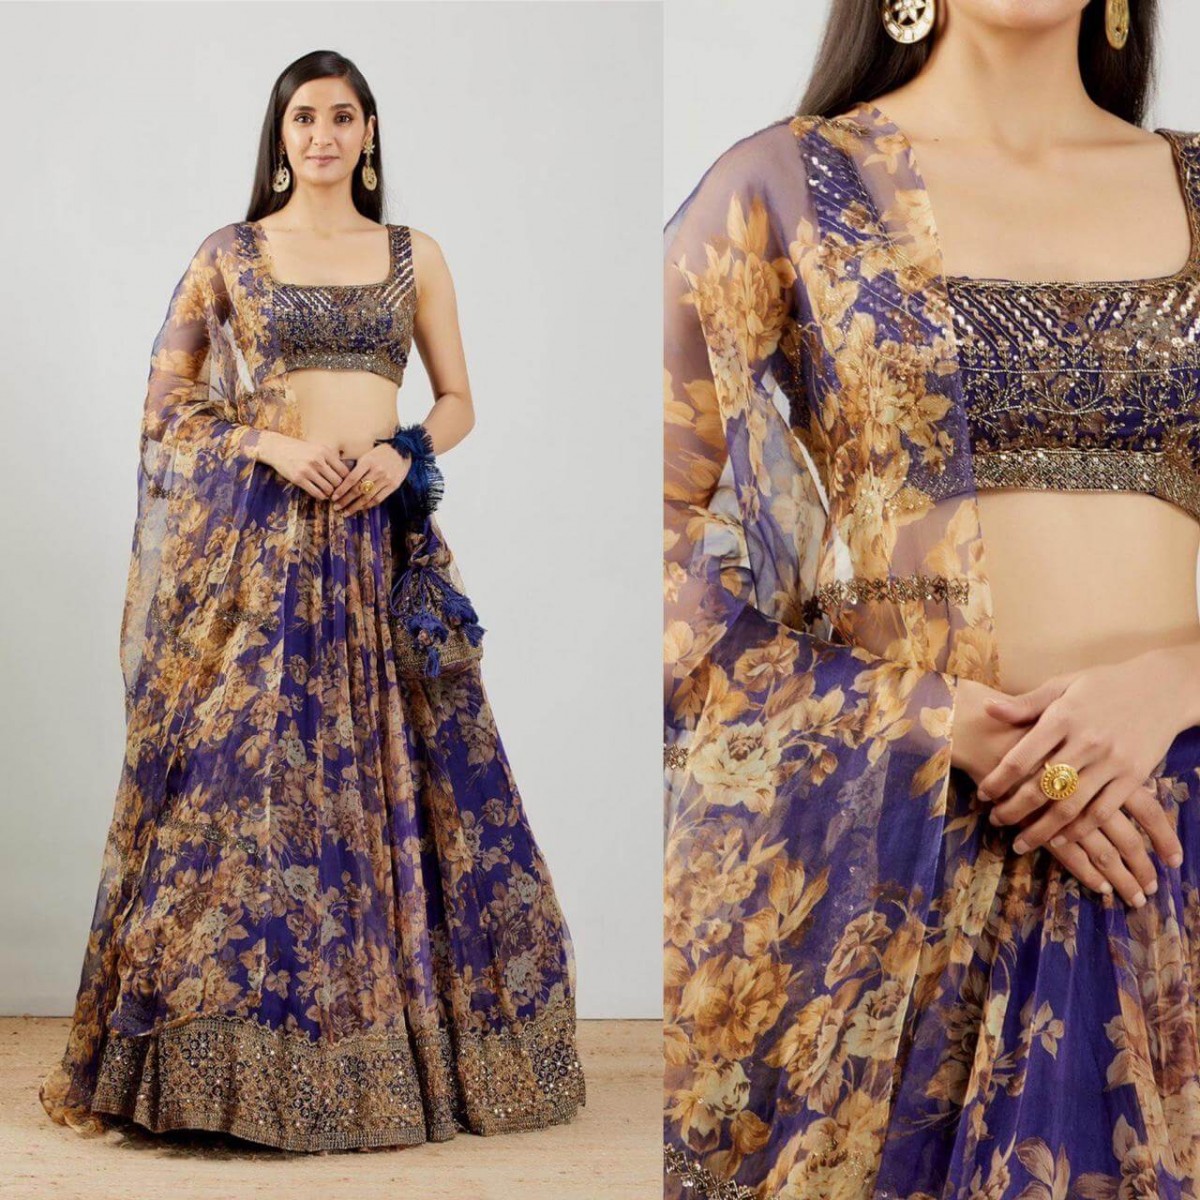 Floral organza lehenga with crop top - set of two by The Anarkali Shop |  The Secret Label